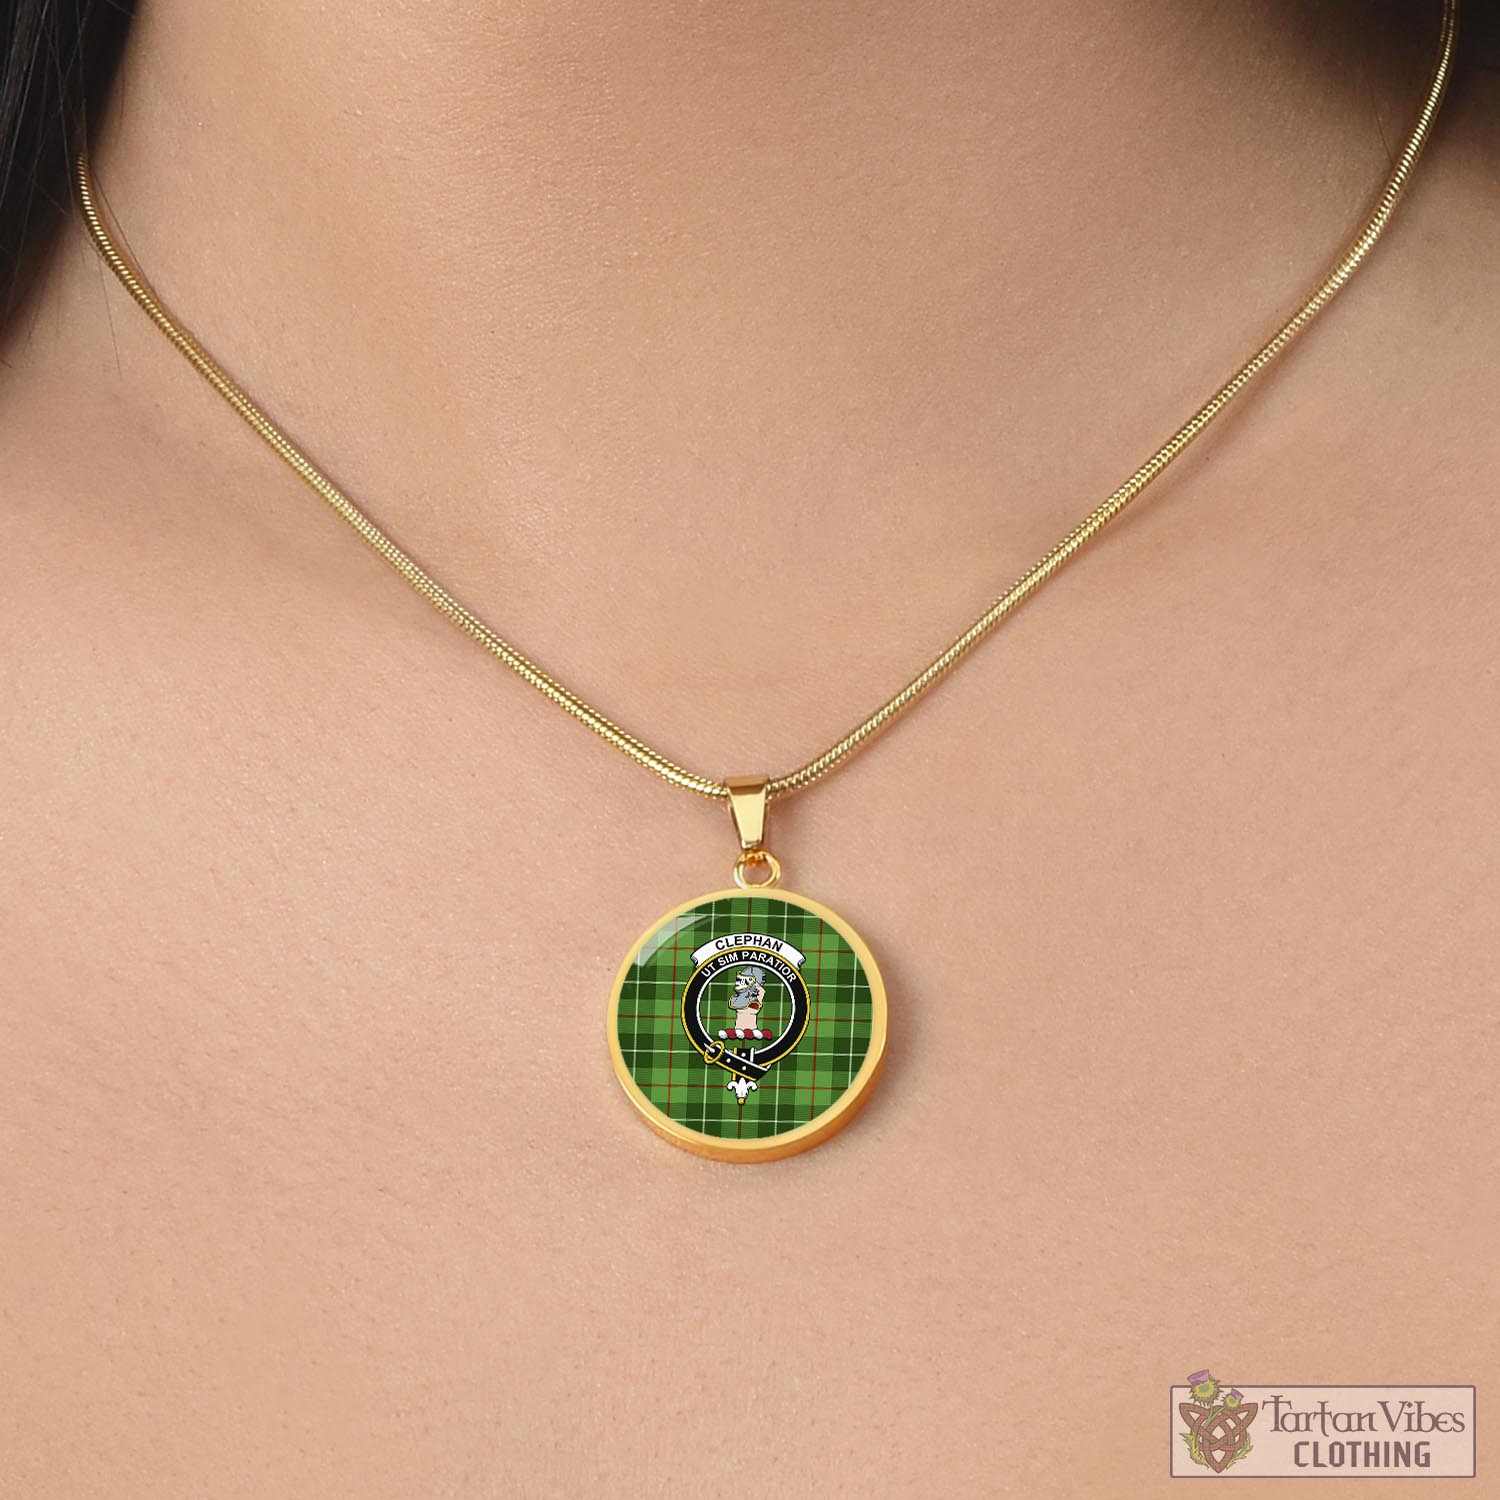 Tartan Vibes Clothing Clephan Tartan Circle Necklace with Family Crest